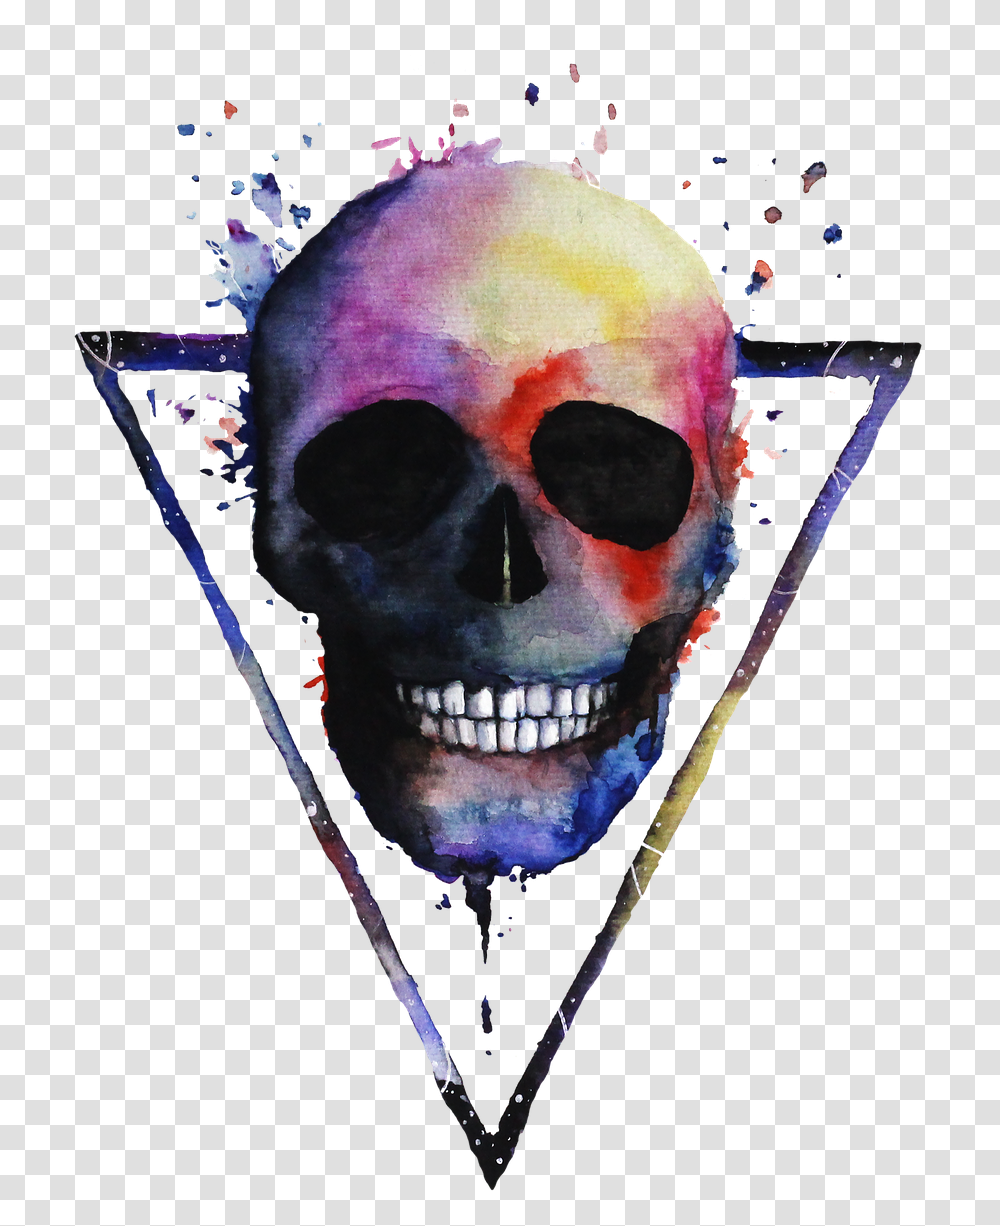 Skeleton Art Watercolor Android Wallpaper Colorful Skull Art, Head, Teeth, Mouth, Bird Transparent Png